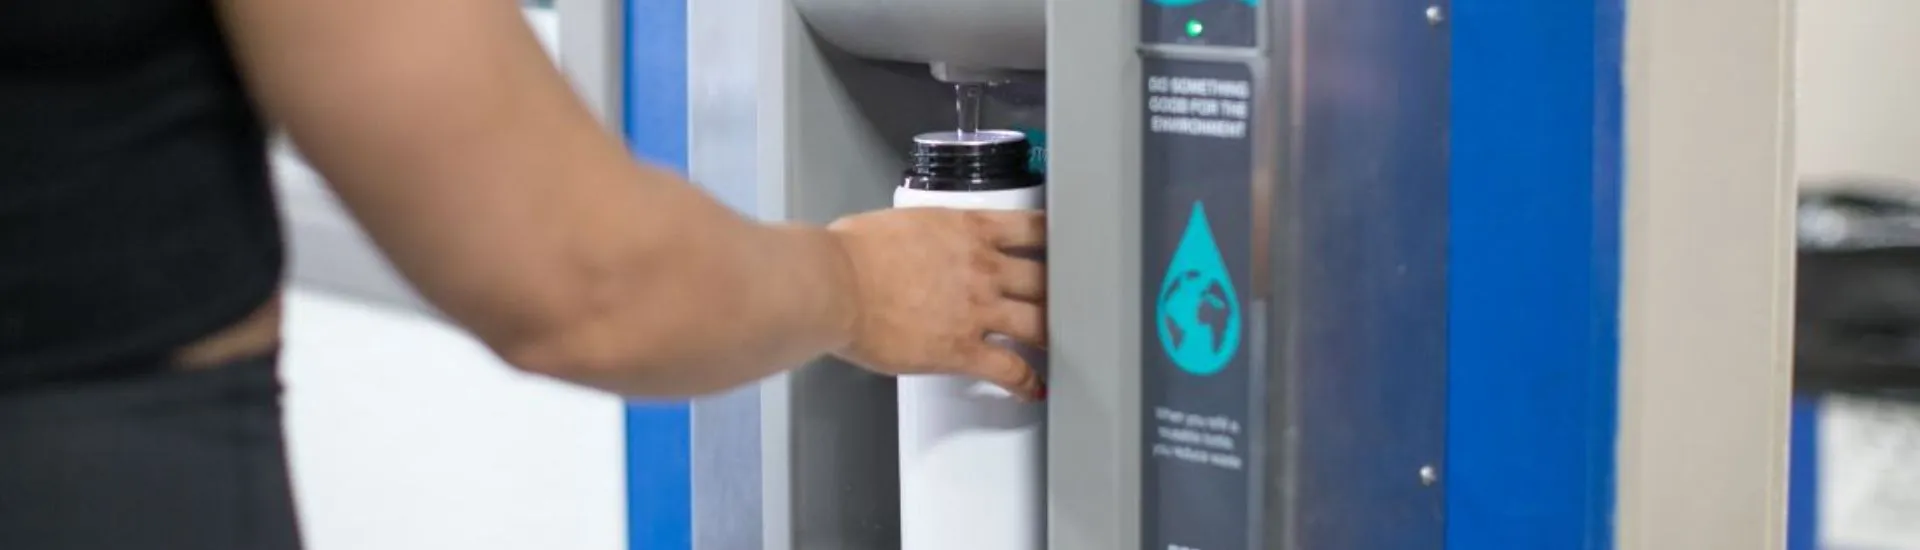 filling up a bottle at a refill station